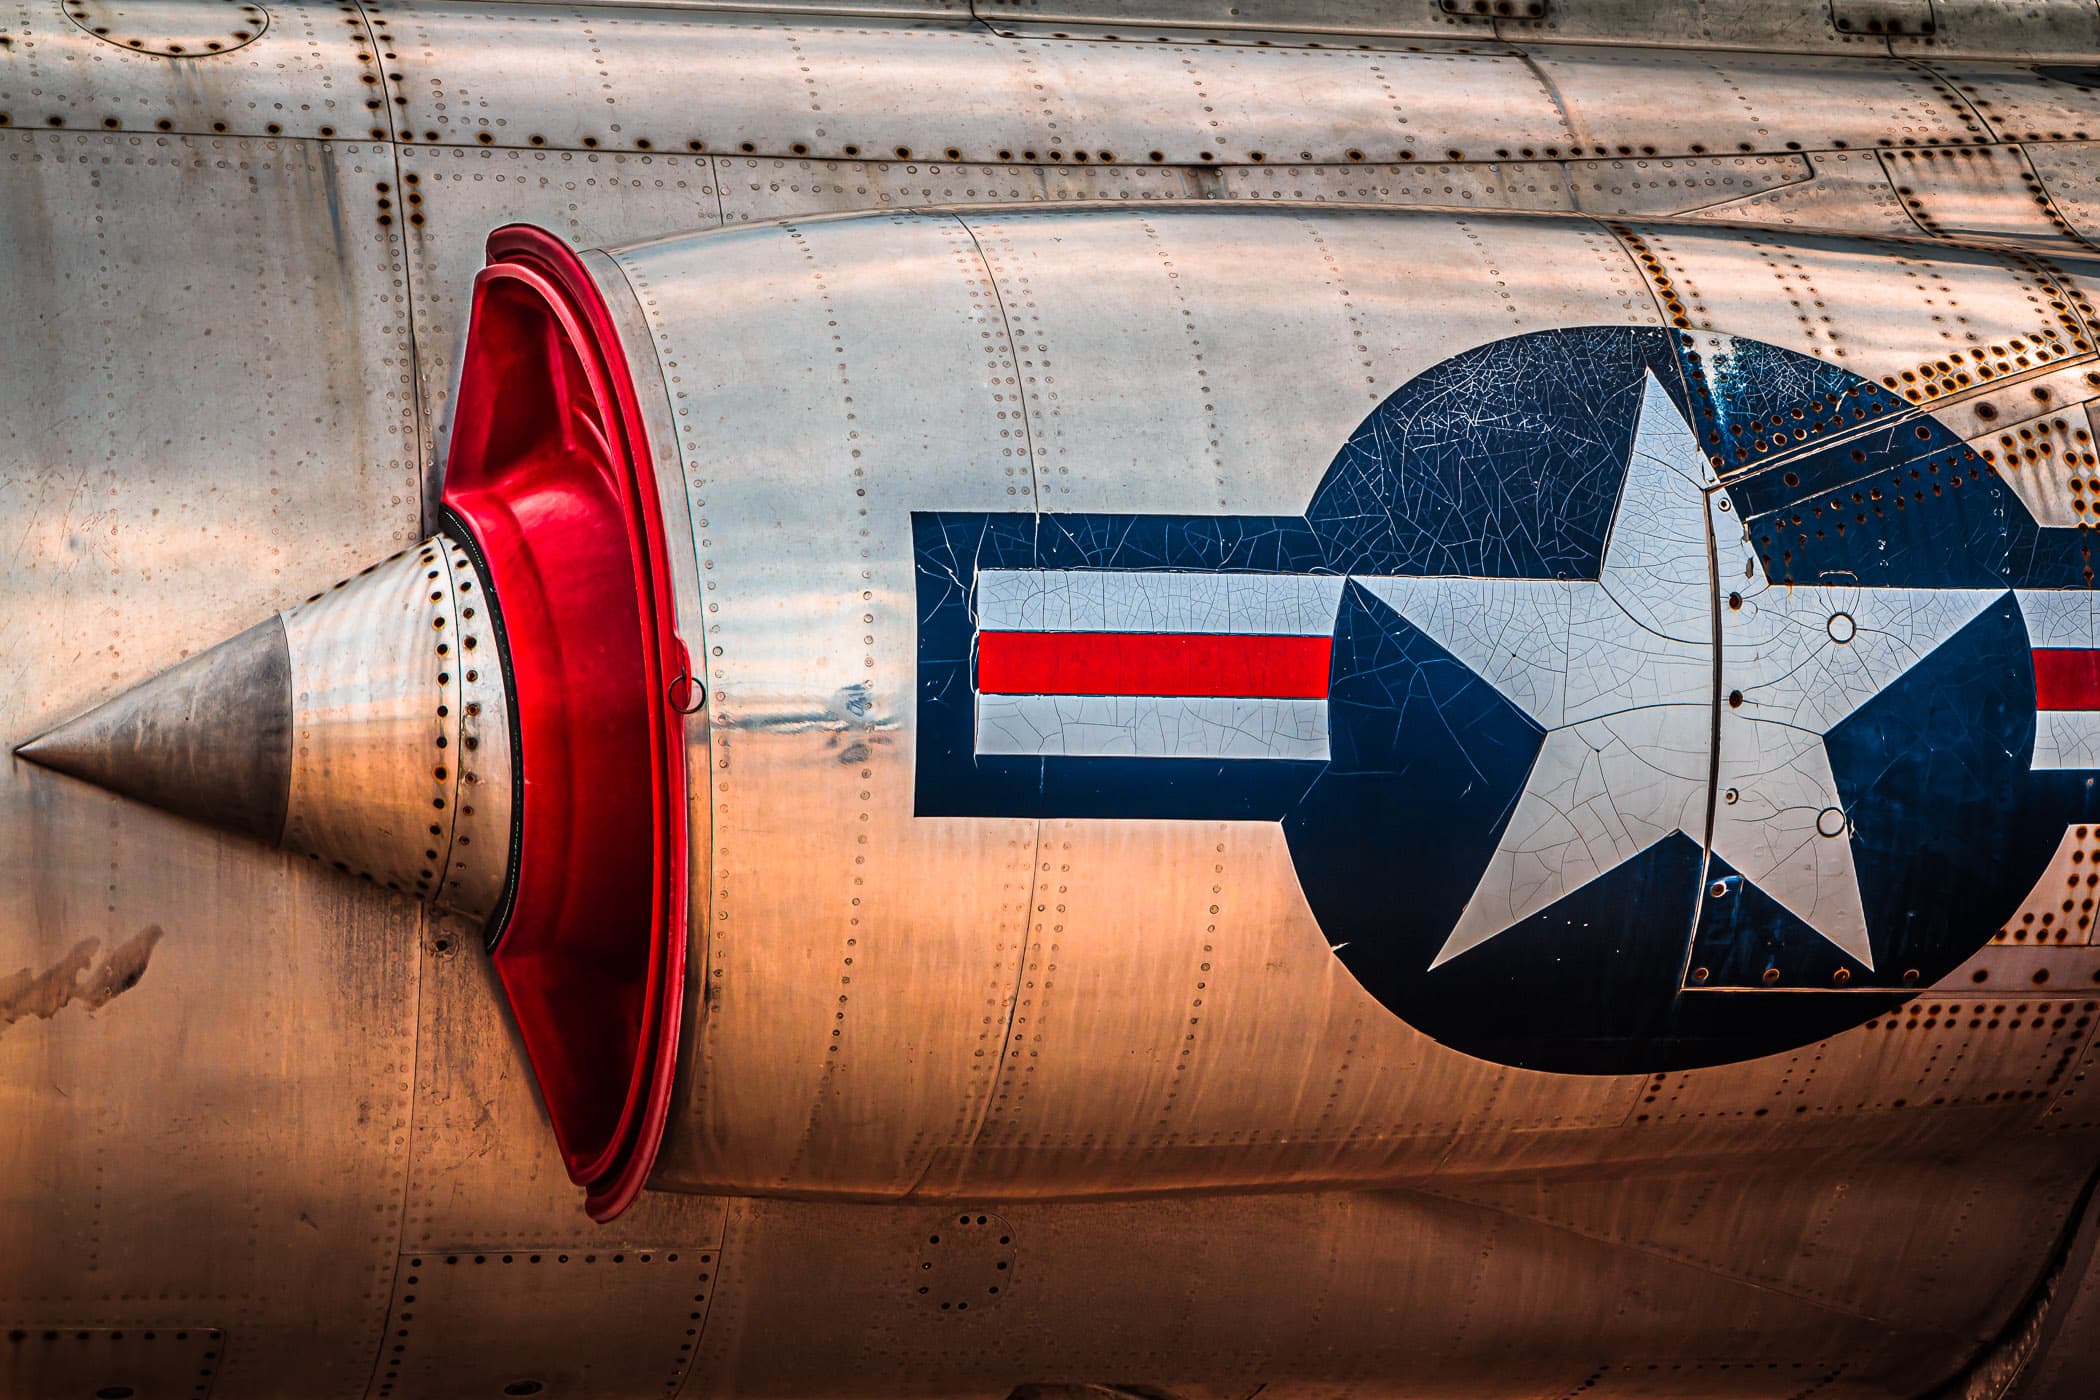 Detail of a Lockheed F-104A Starfighter at the Cavanaugh Flight Museum, Addison, Texas.